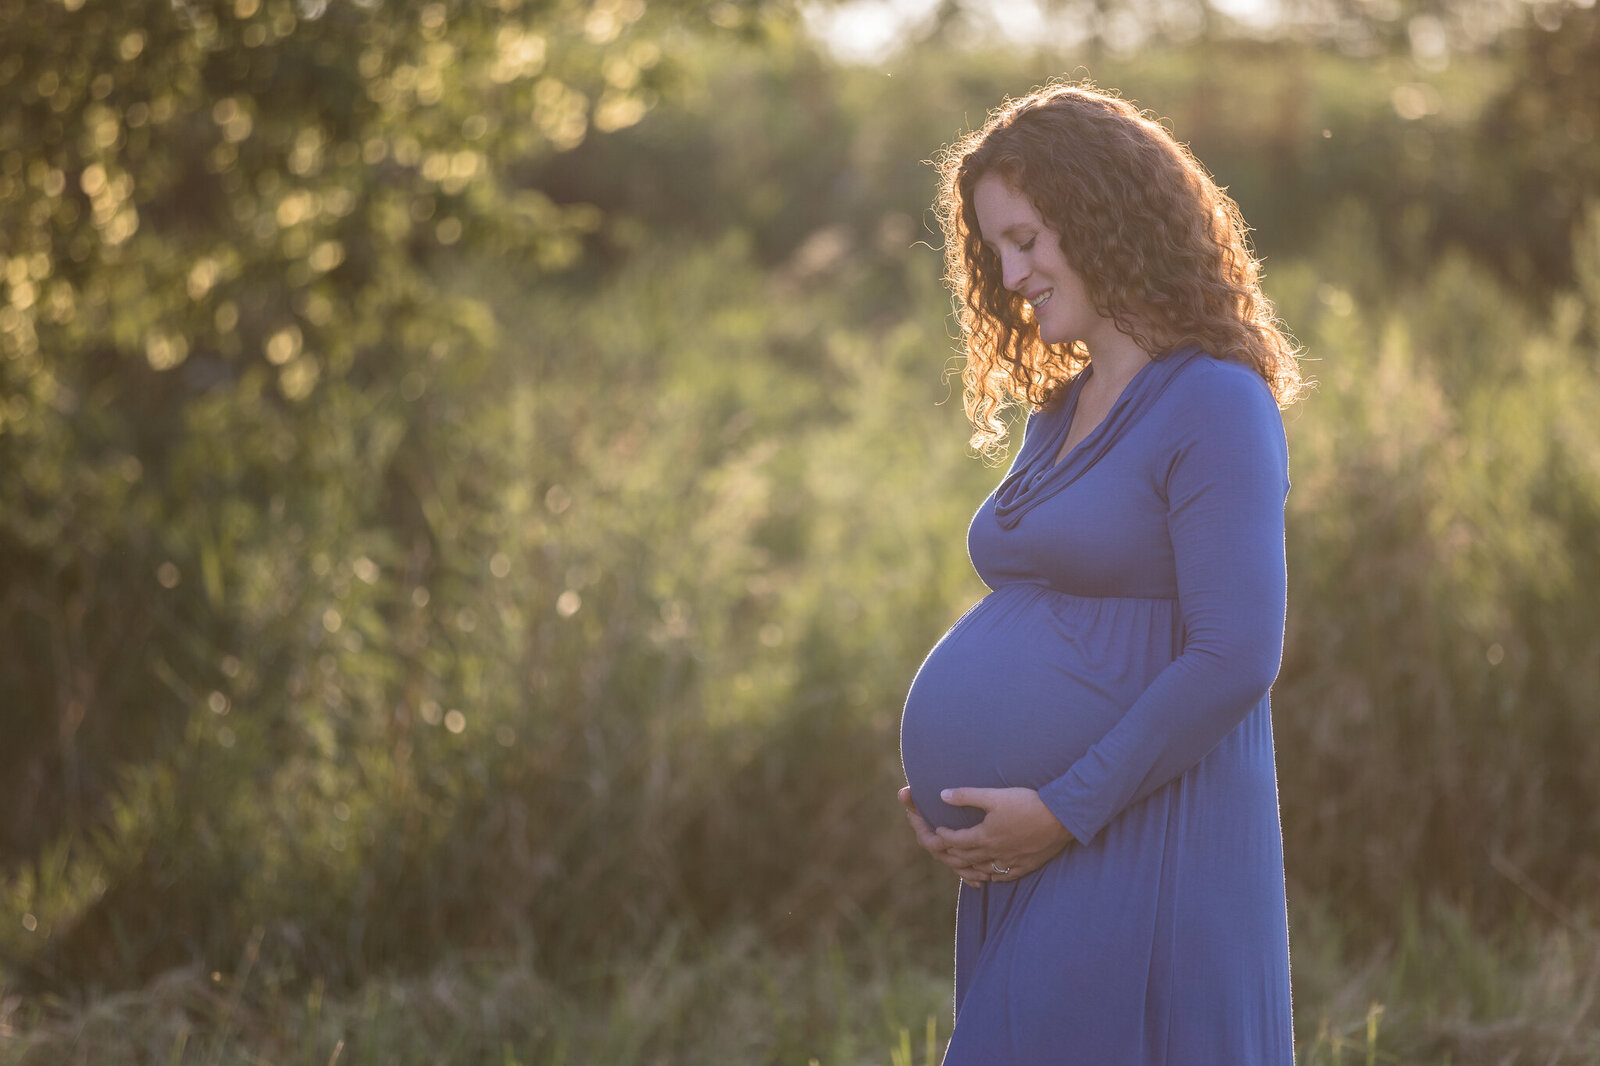 Pregnant woman in field holding belly near Tottenham Ontario